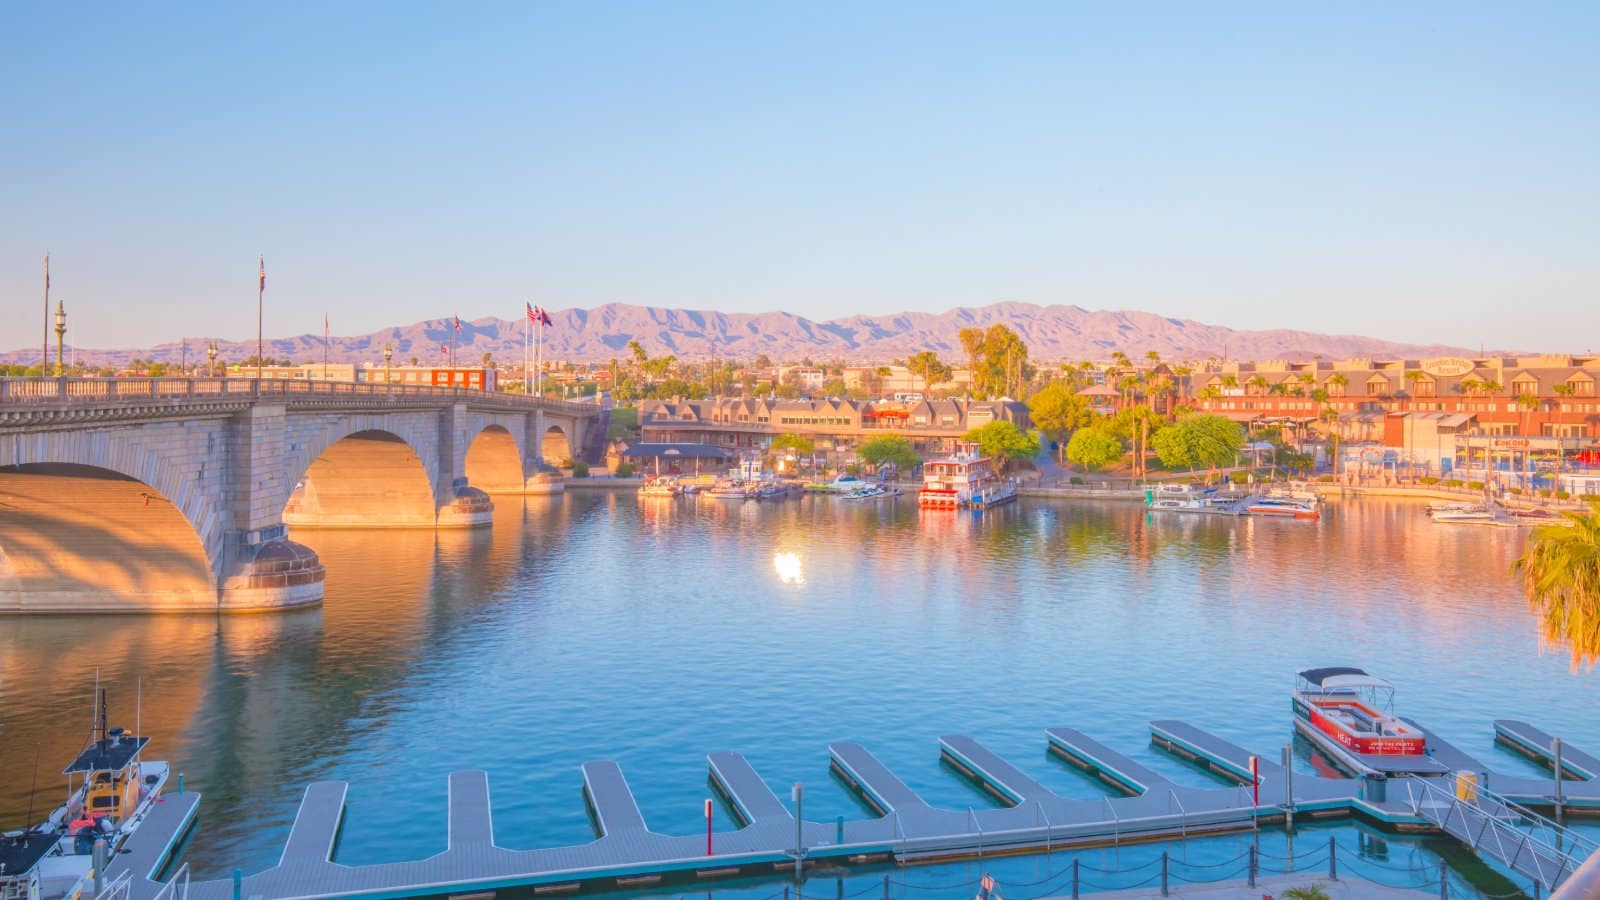 <p class="wp-caption-text">Image Credit: Shutterstock / RYO Alexandre</p>  <p><span><strong>Depth:</strong> 90 feet</span> <span>Lake Havasu is a vibrant oasis in the desert, known for the London Bridge that spans its waters. It’s a hotspot for boating, fishing, and enjoying spring break festivities.</span></p>